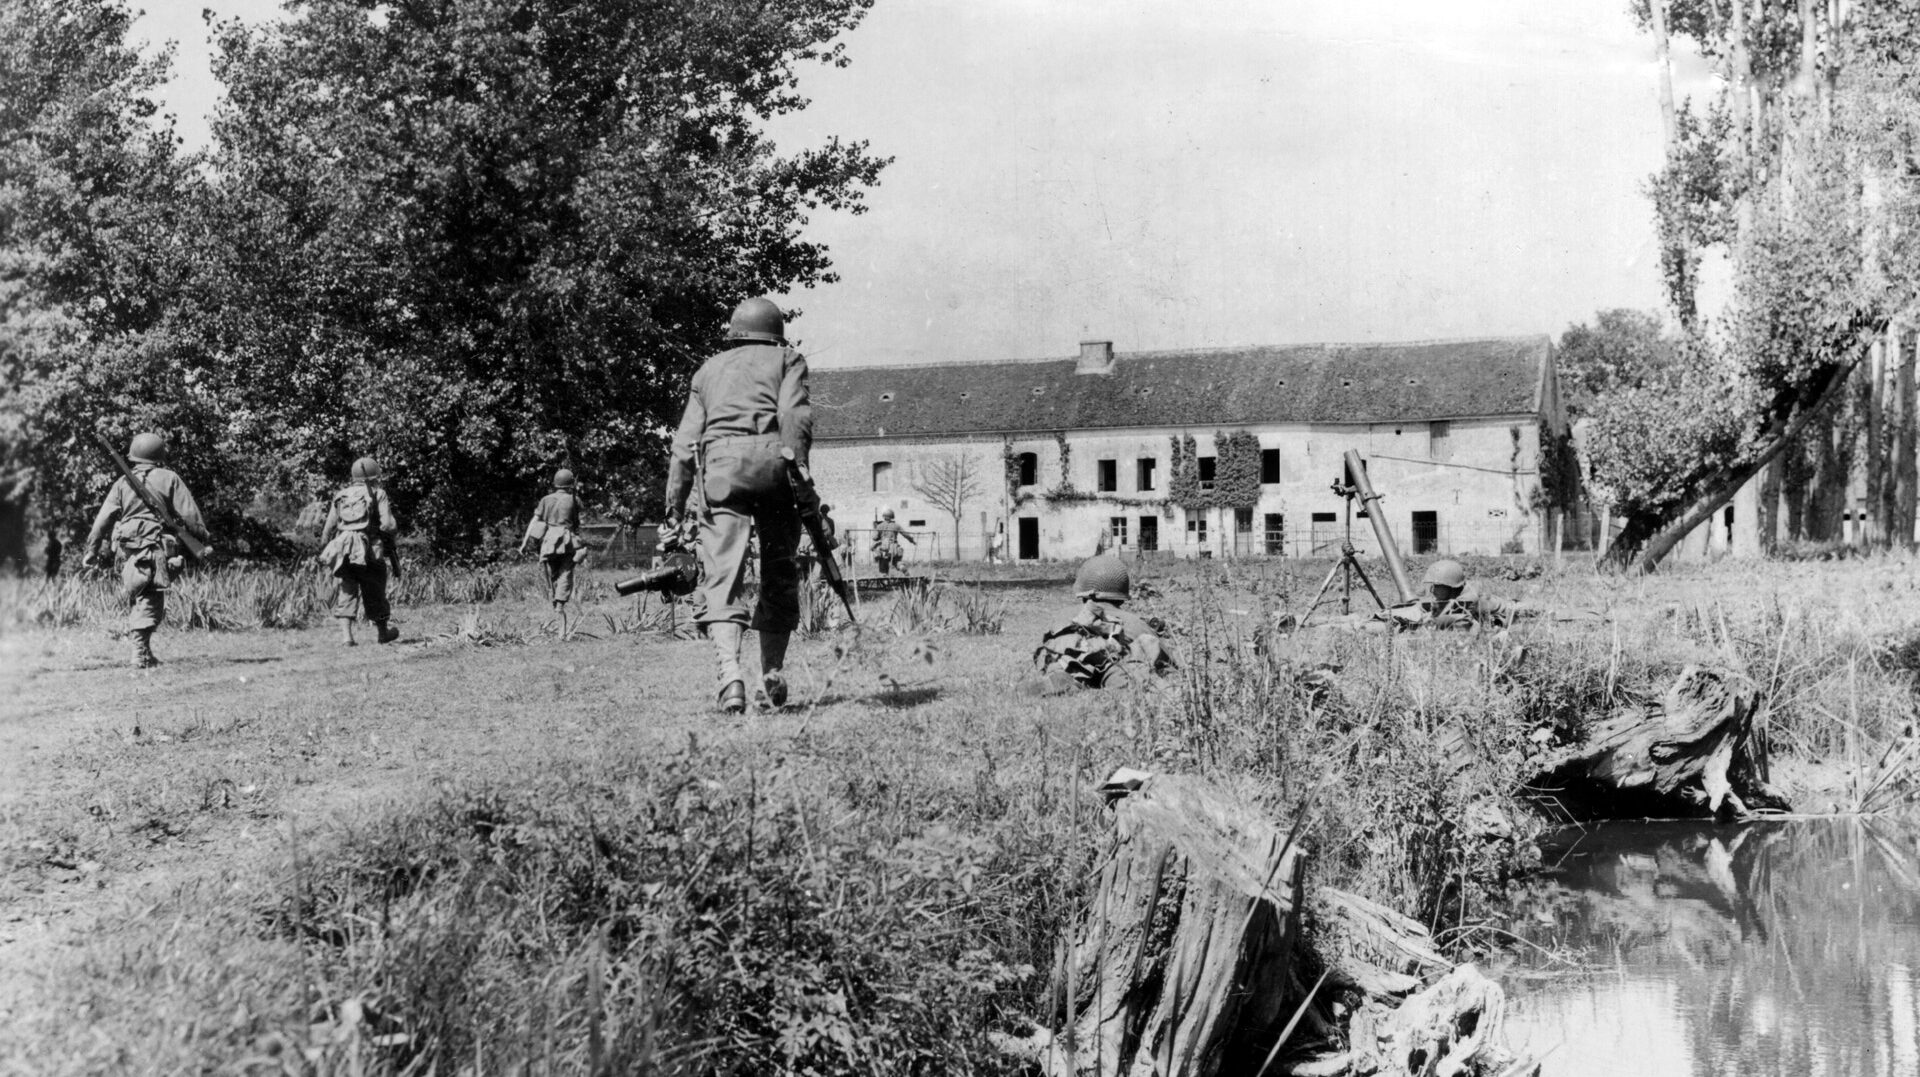 An infantry patrol of the 318th Regiment, 80th Division, moves forward against an enemy-occupied farmhouse near Argentan as the supporting mortar section waits to provide heavier fire if needed.